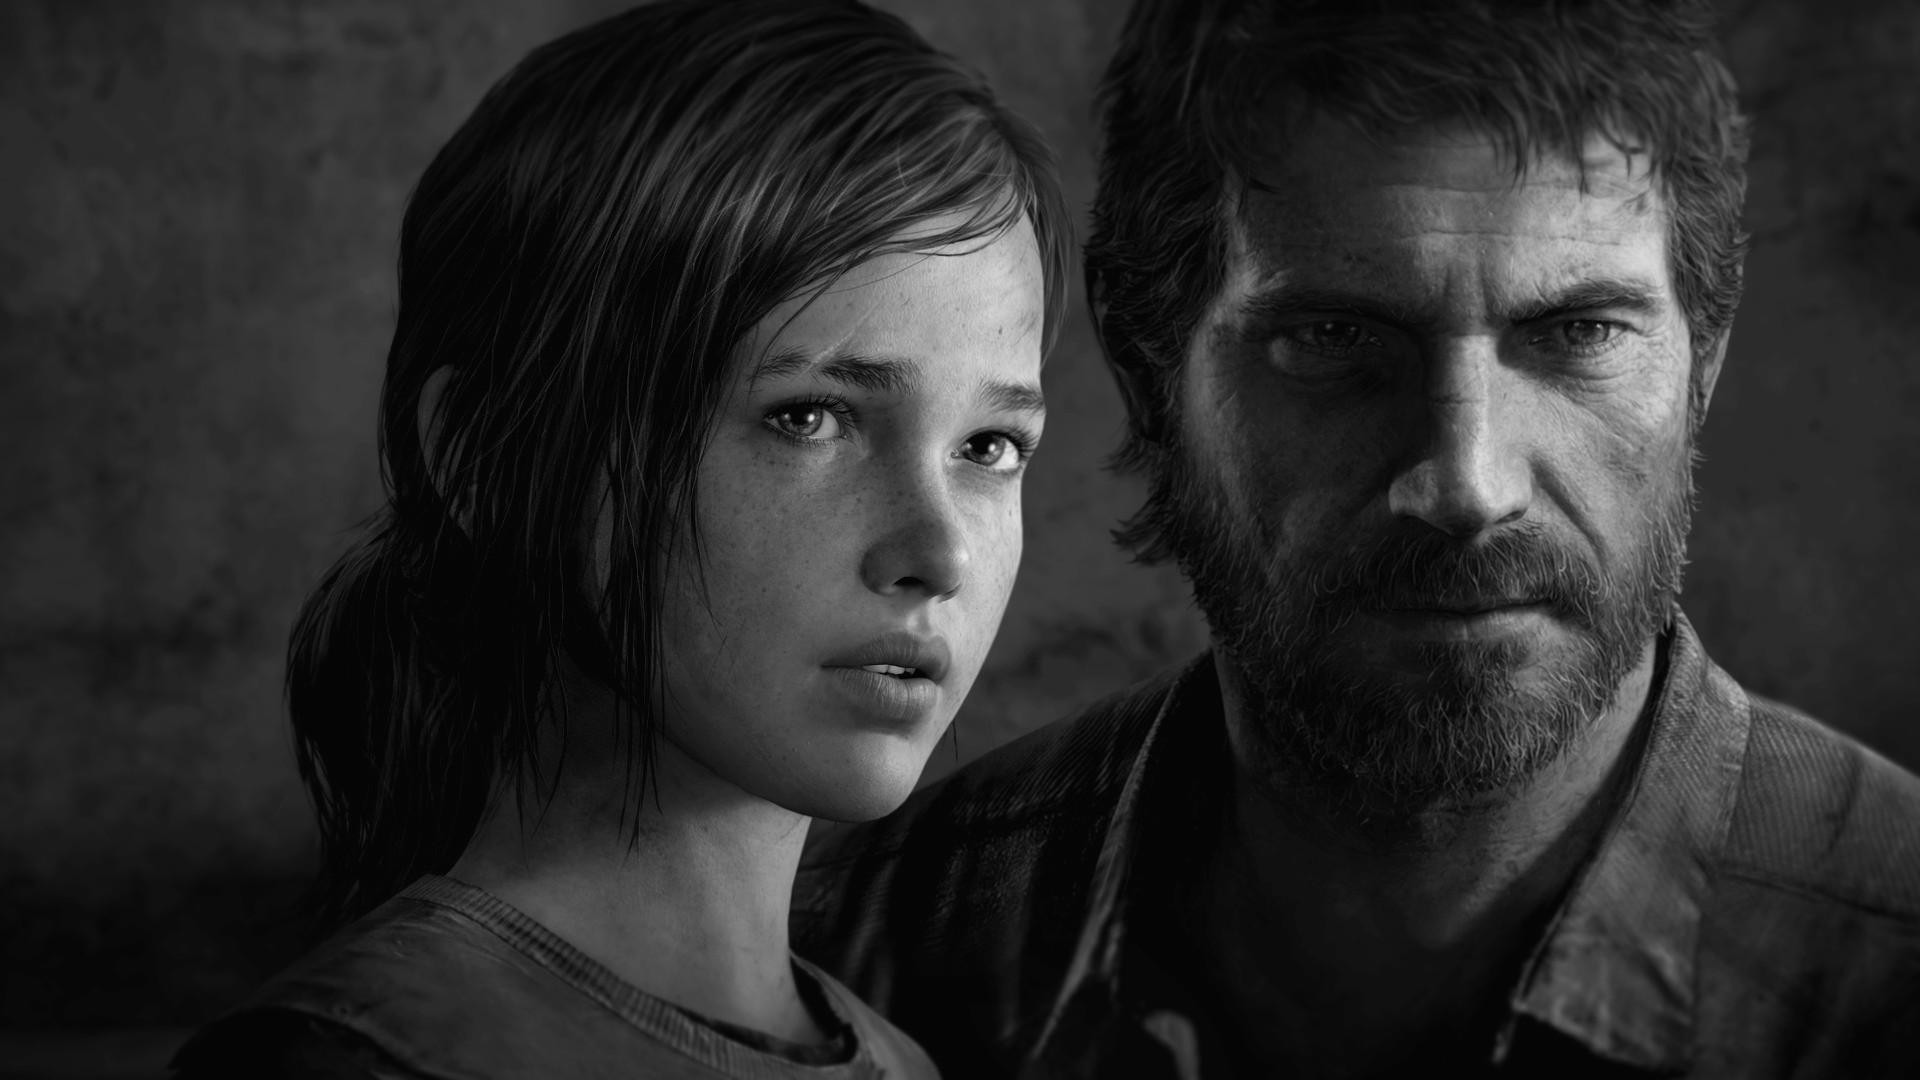 5. The Last of Us